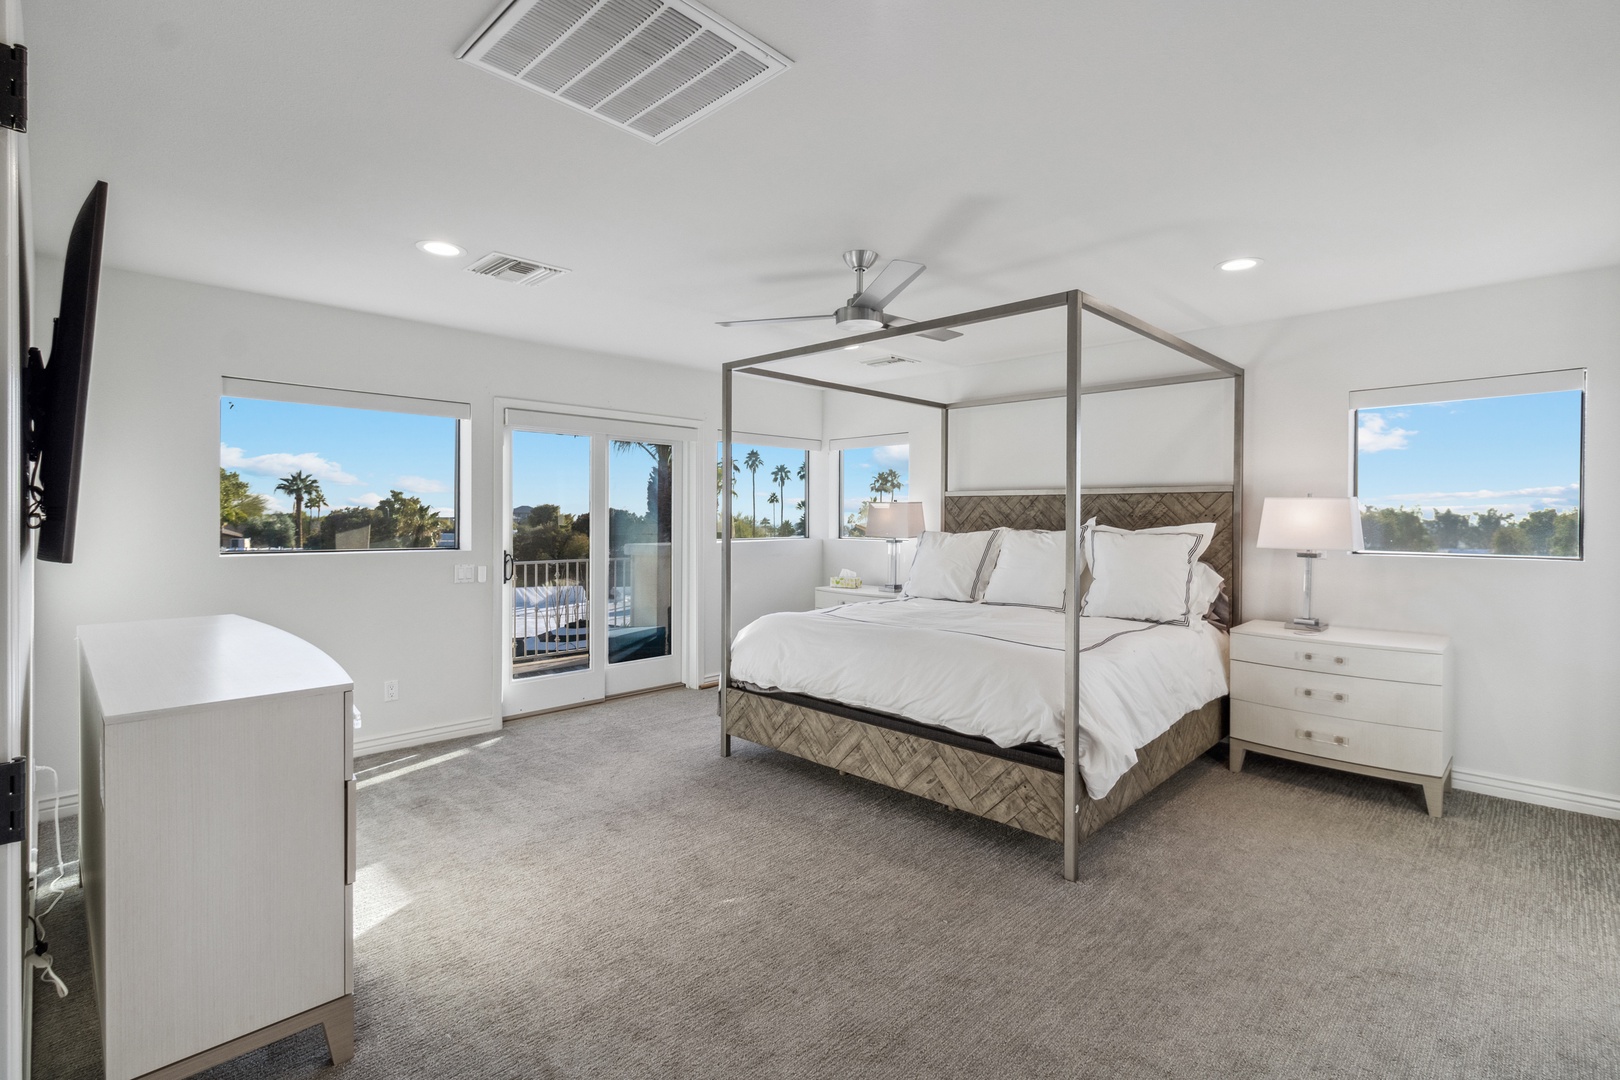 Phoenix Vacation Rentals, Majestic Mountain Views at Piestewa Peak Paradise - An oversized primary suite upstairs provides abundant relaxing space with panoramic views from the reading nook and deck